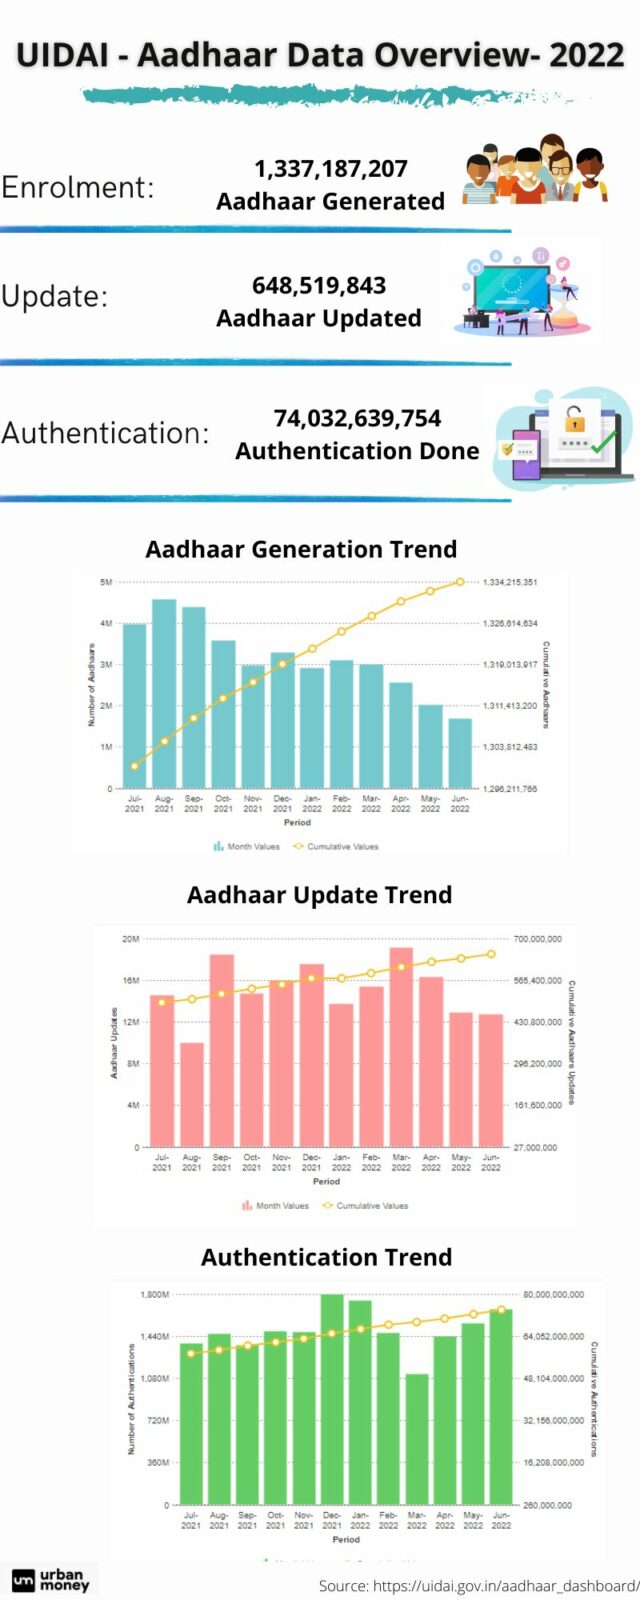 UIDAI Overview